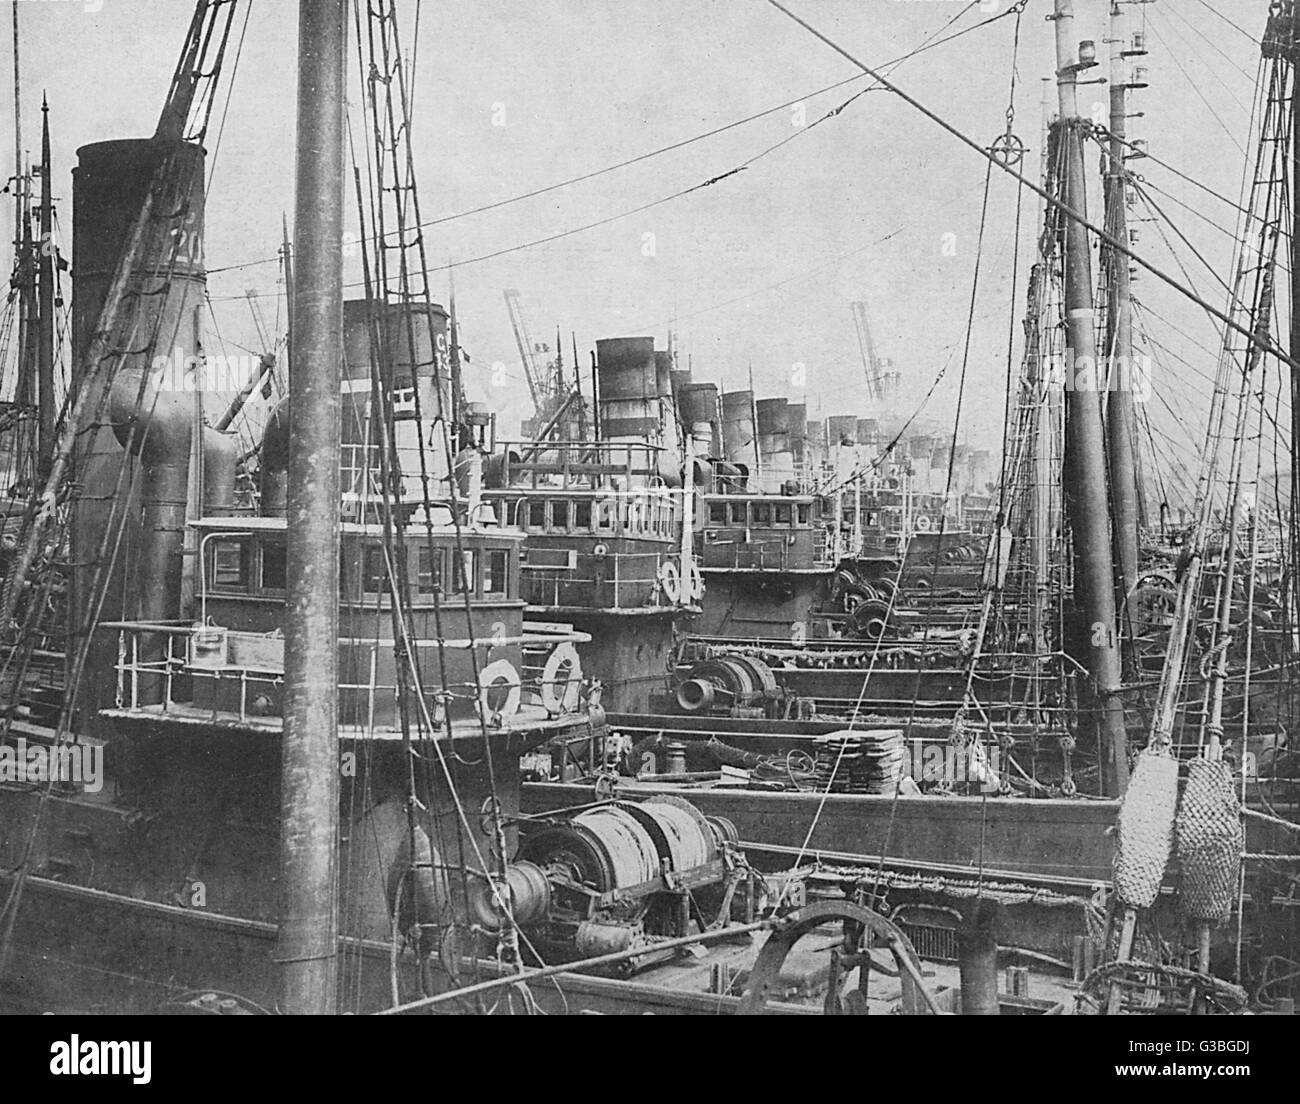 Fishing trawlers and liners   laid up at the Fleetwood docks,   owing to shortage of coal due  to the General Strike        Date: 1926 Stock Photo